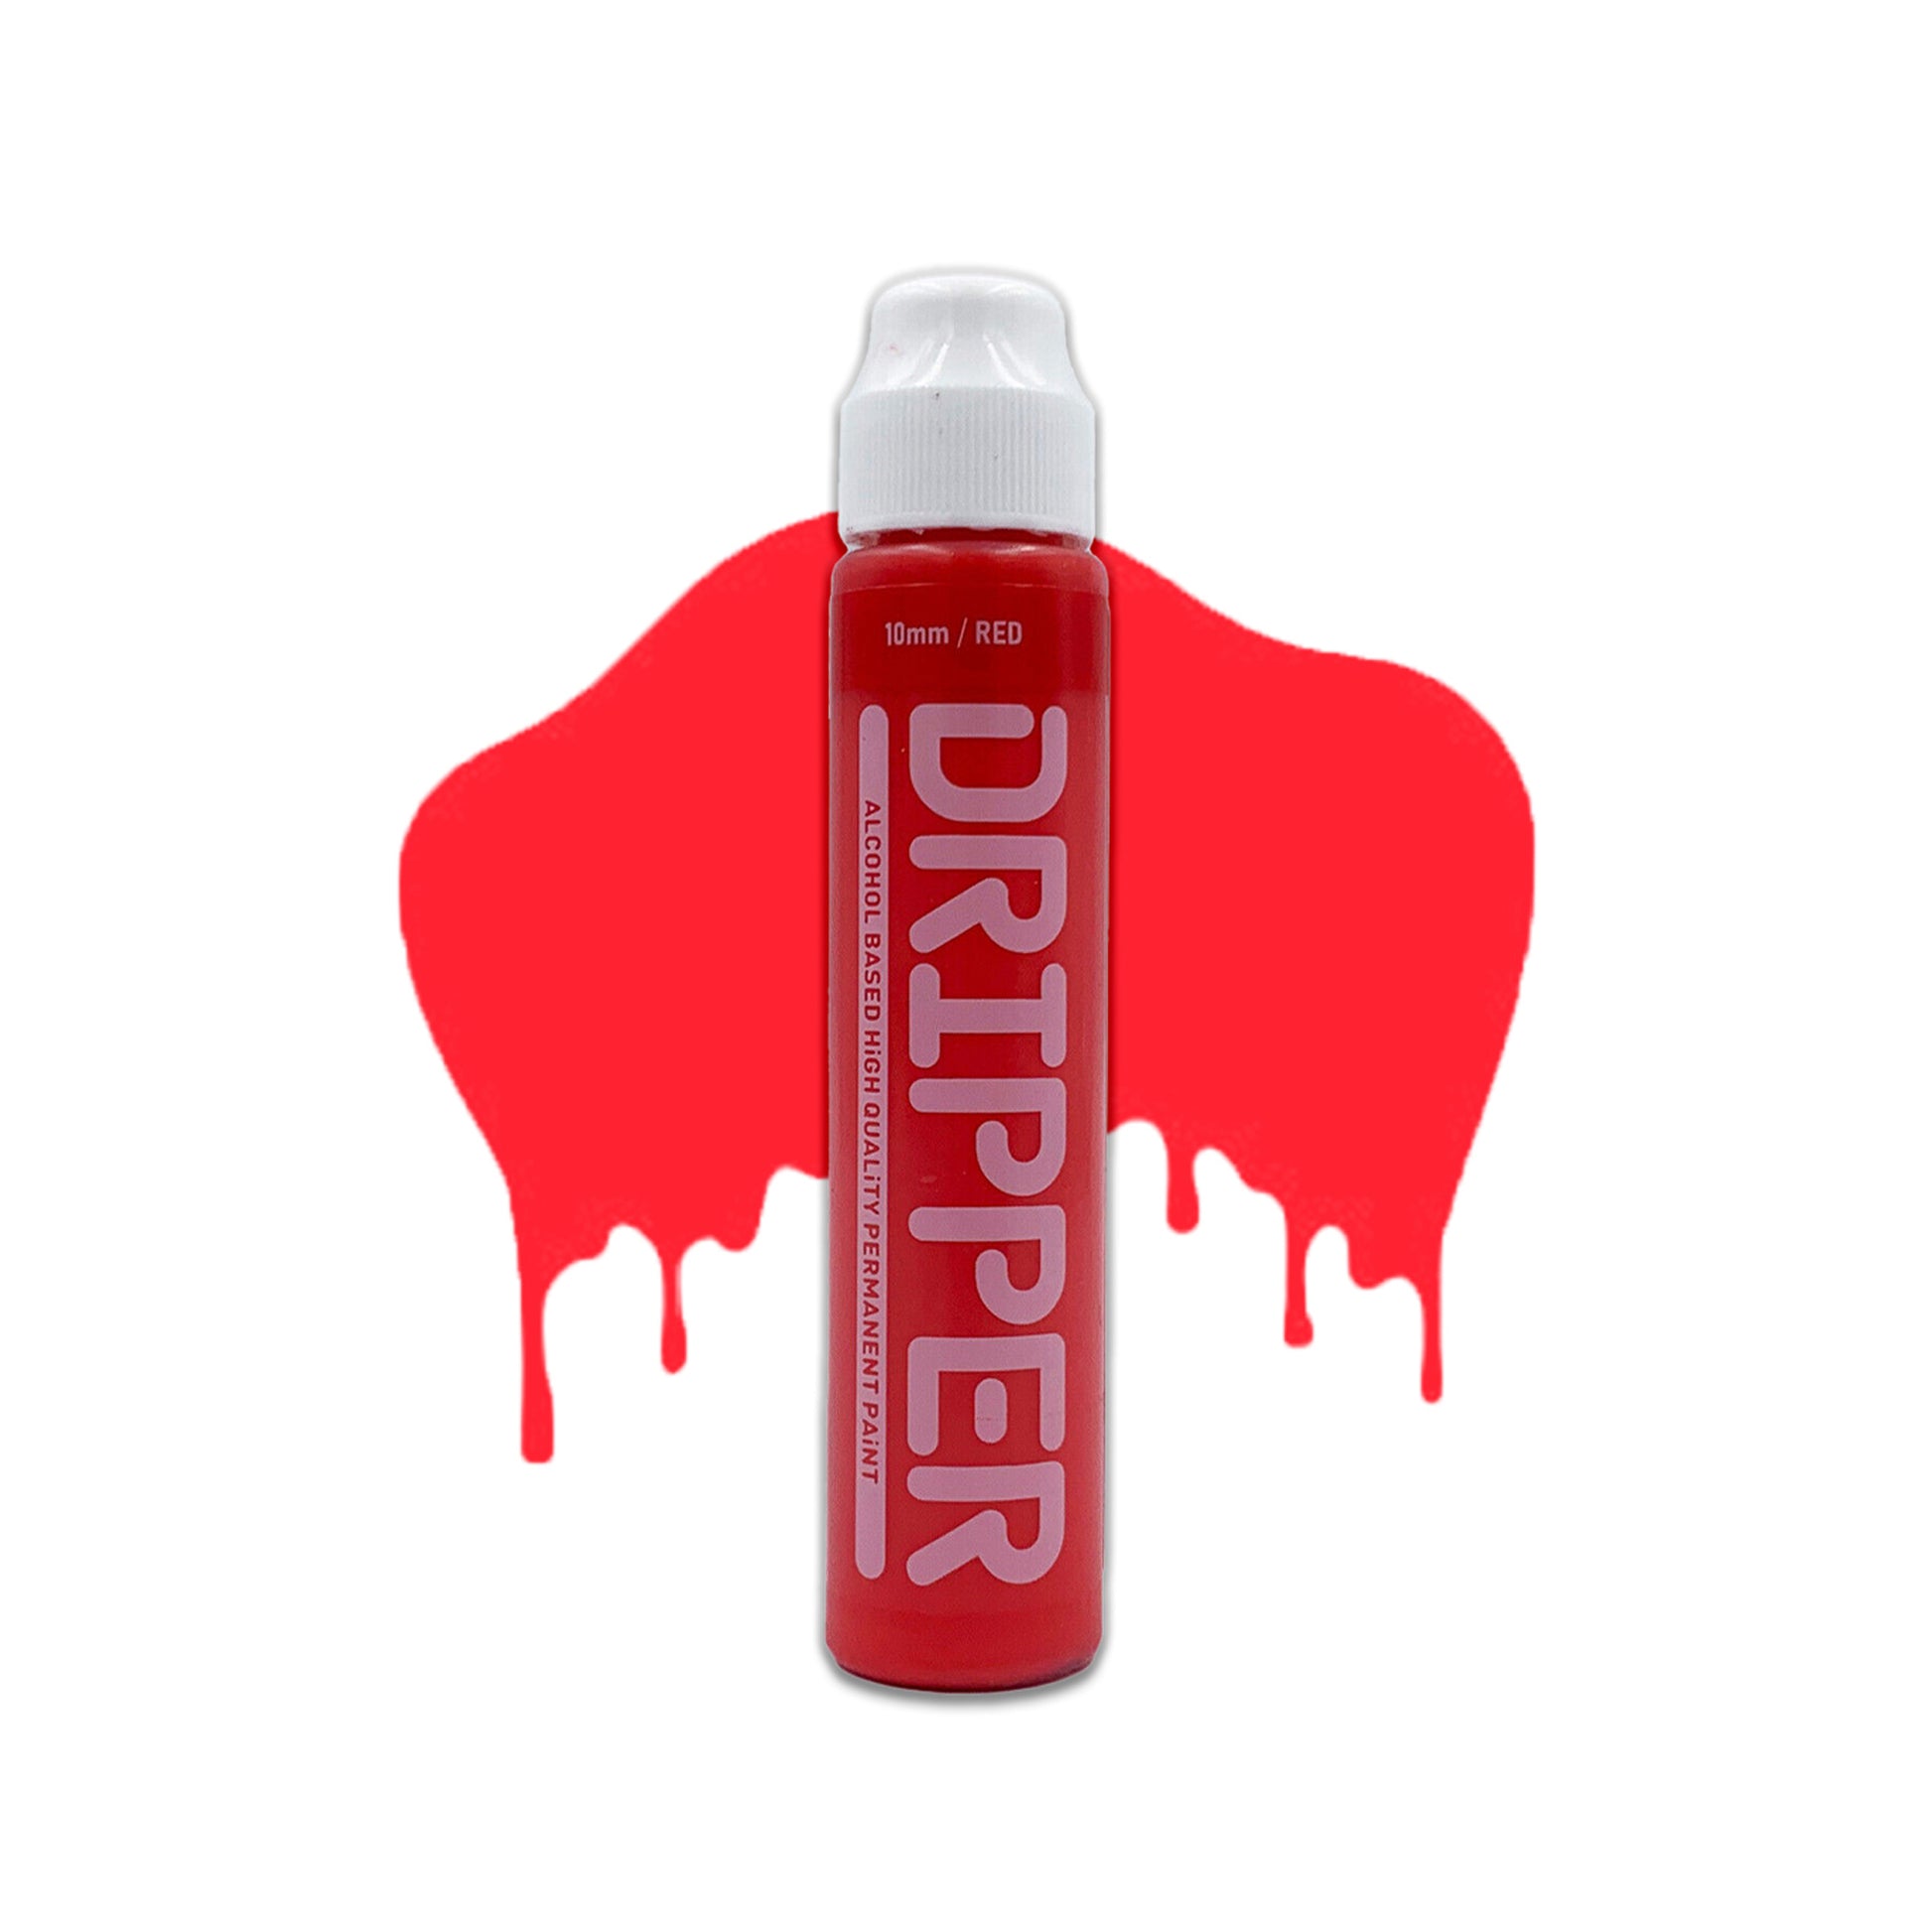 Red mop container with white cap and the word "Dripper" written on the face in a white font. The mop is positioned in front of a white background with drips that match the red color of the mop.